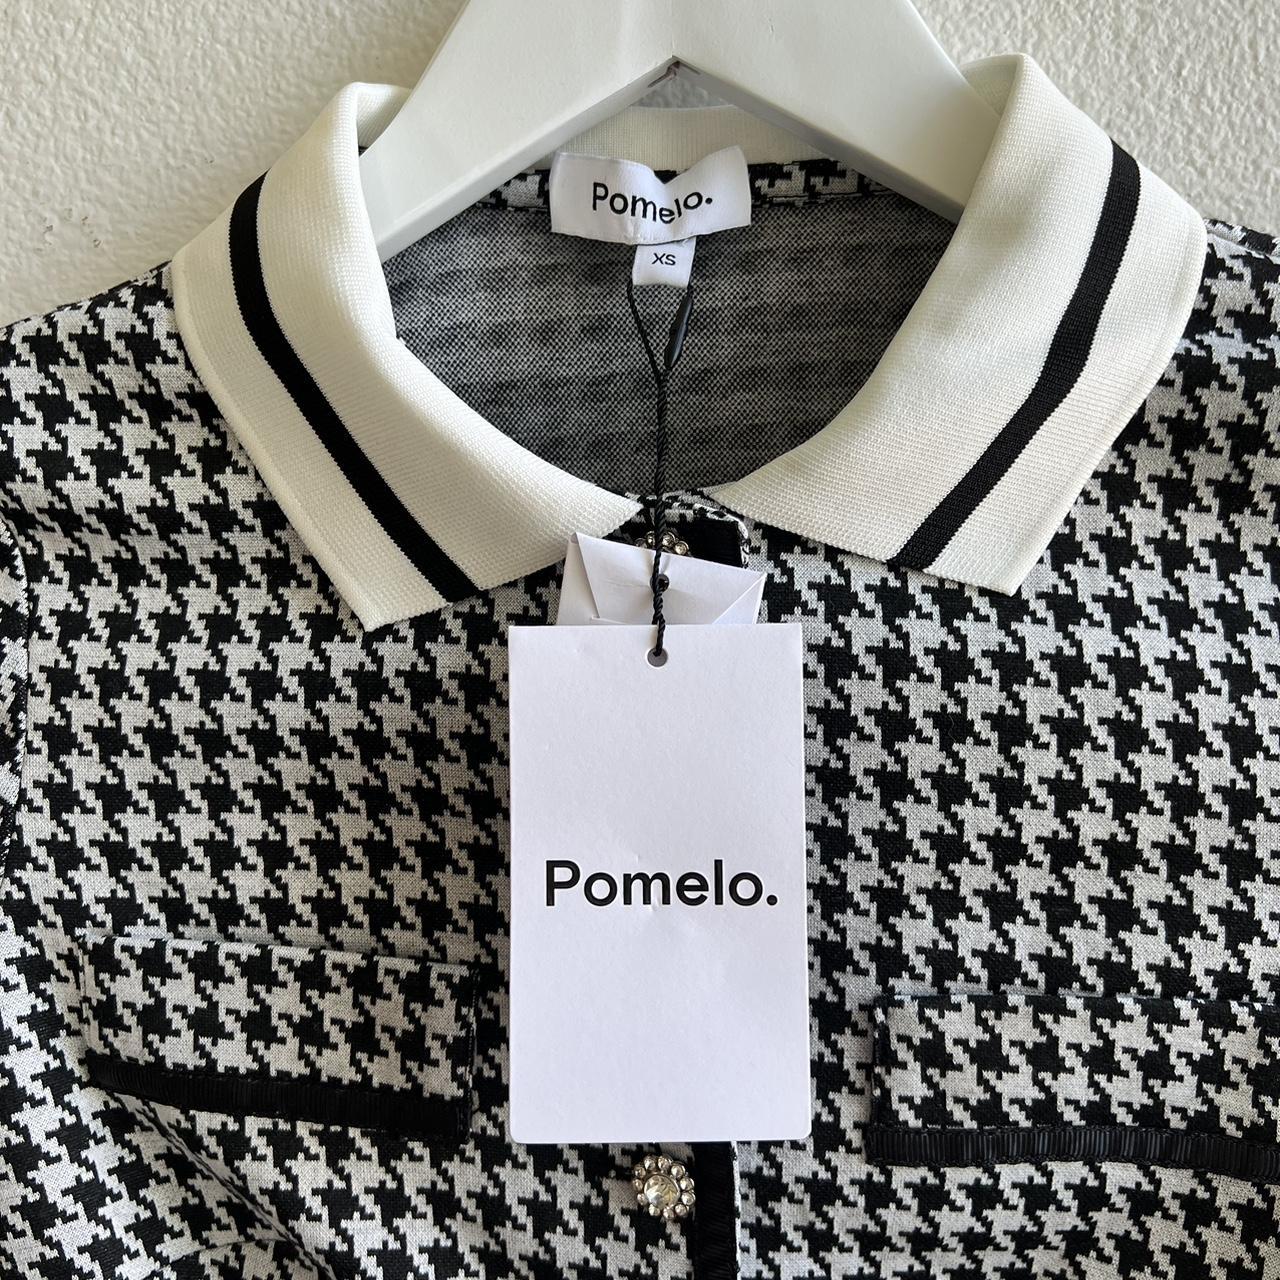 Product Image 3 - Pomelo - Houndstooth Crop Top
Size